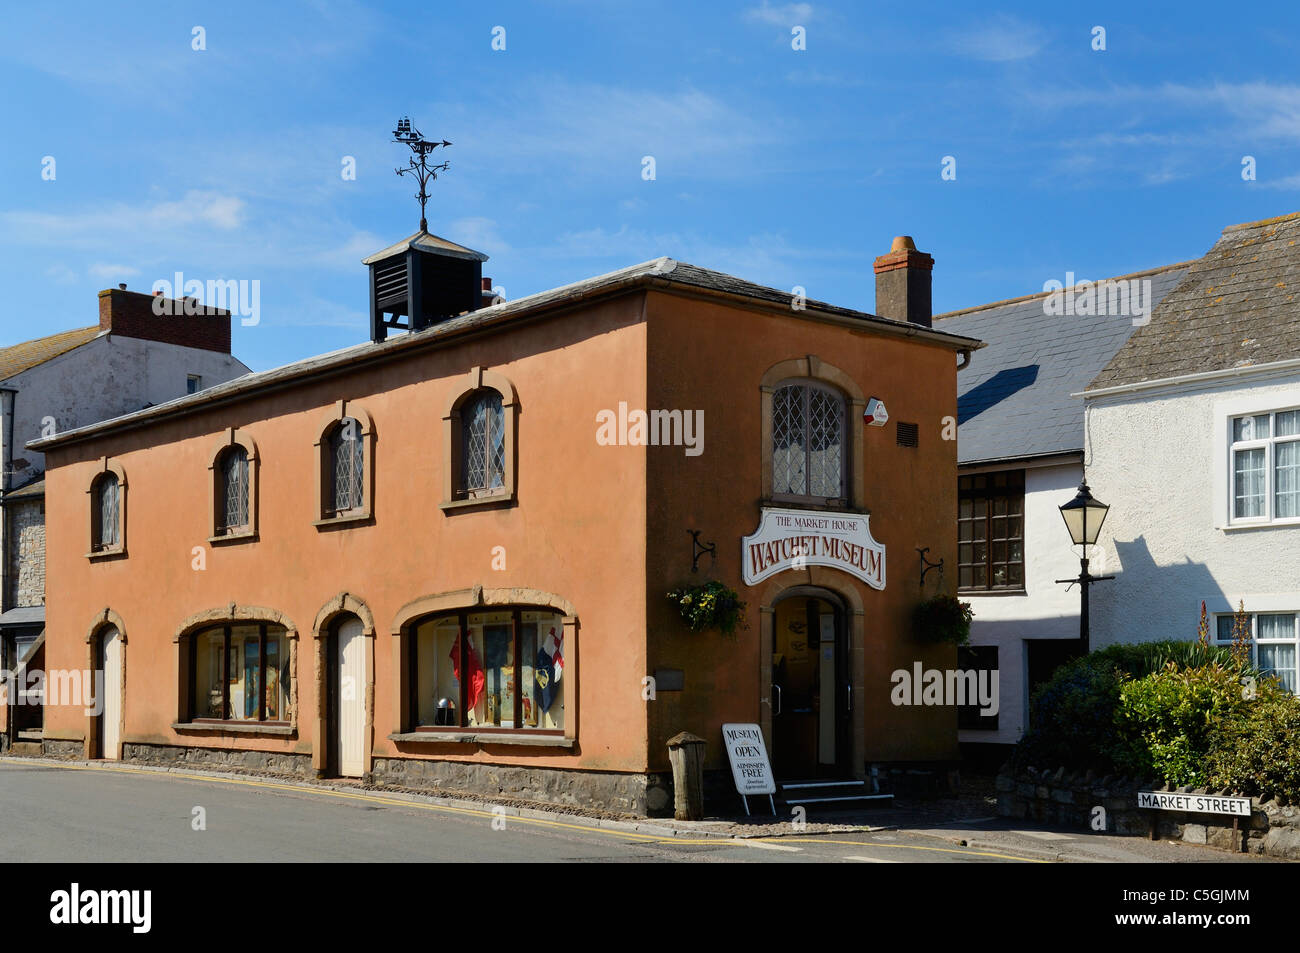 The Market House Watchet Museum at the harbour town of Watchet, Somerset, England. Stock Photo